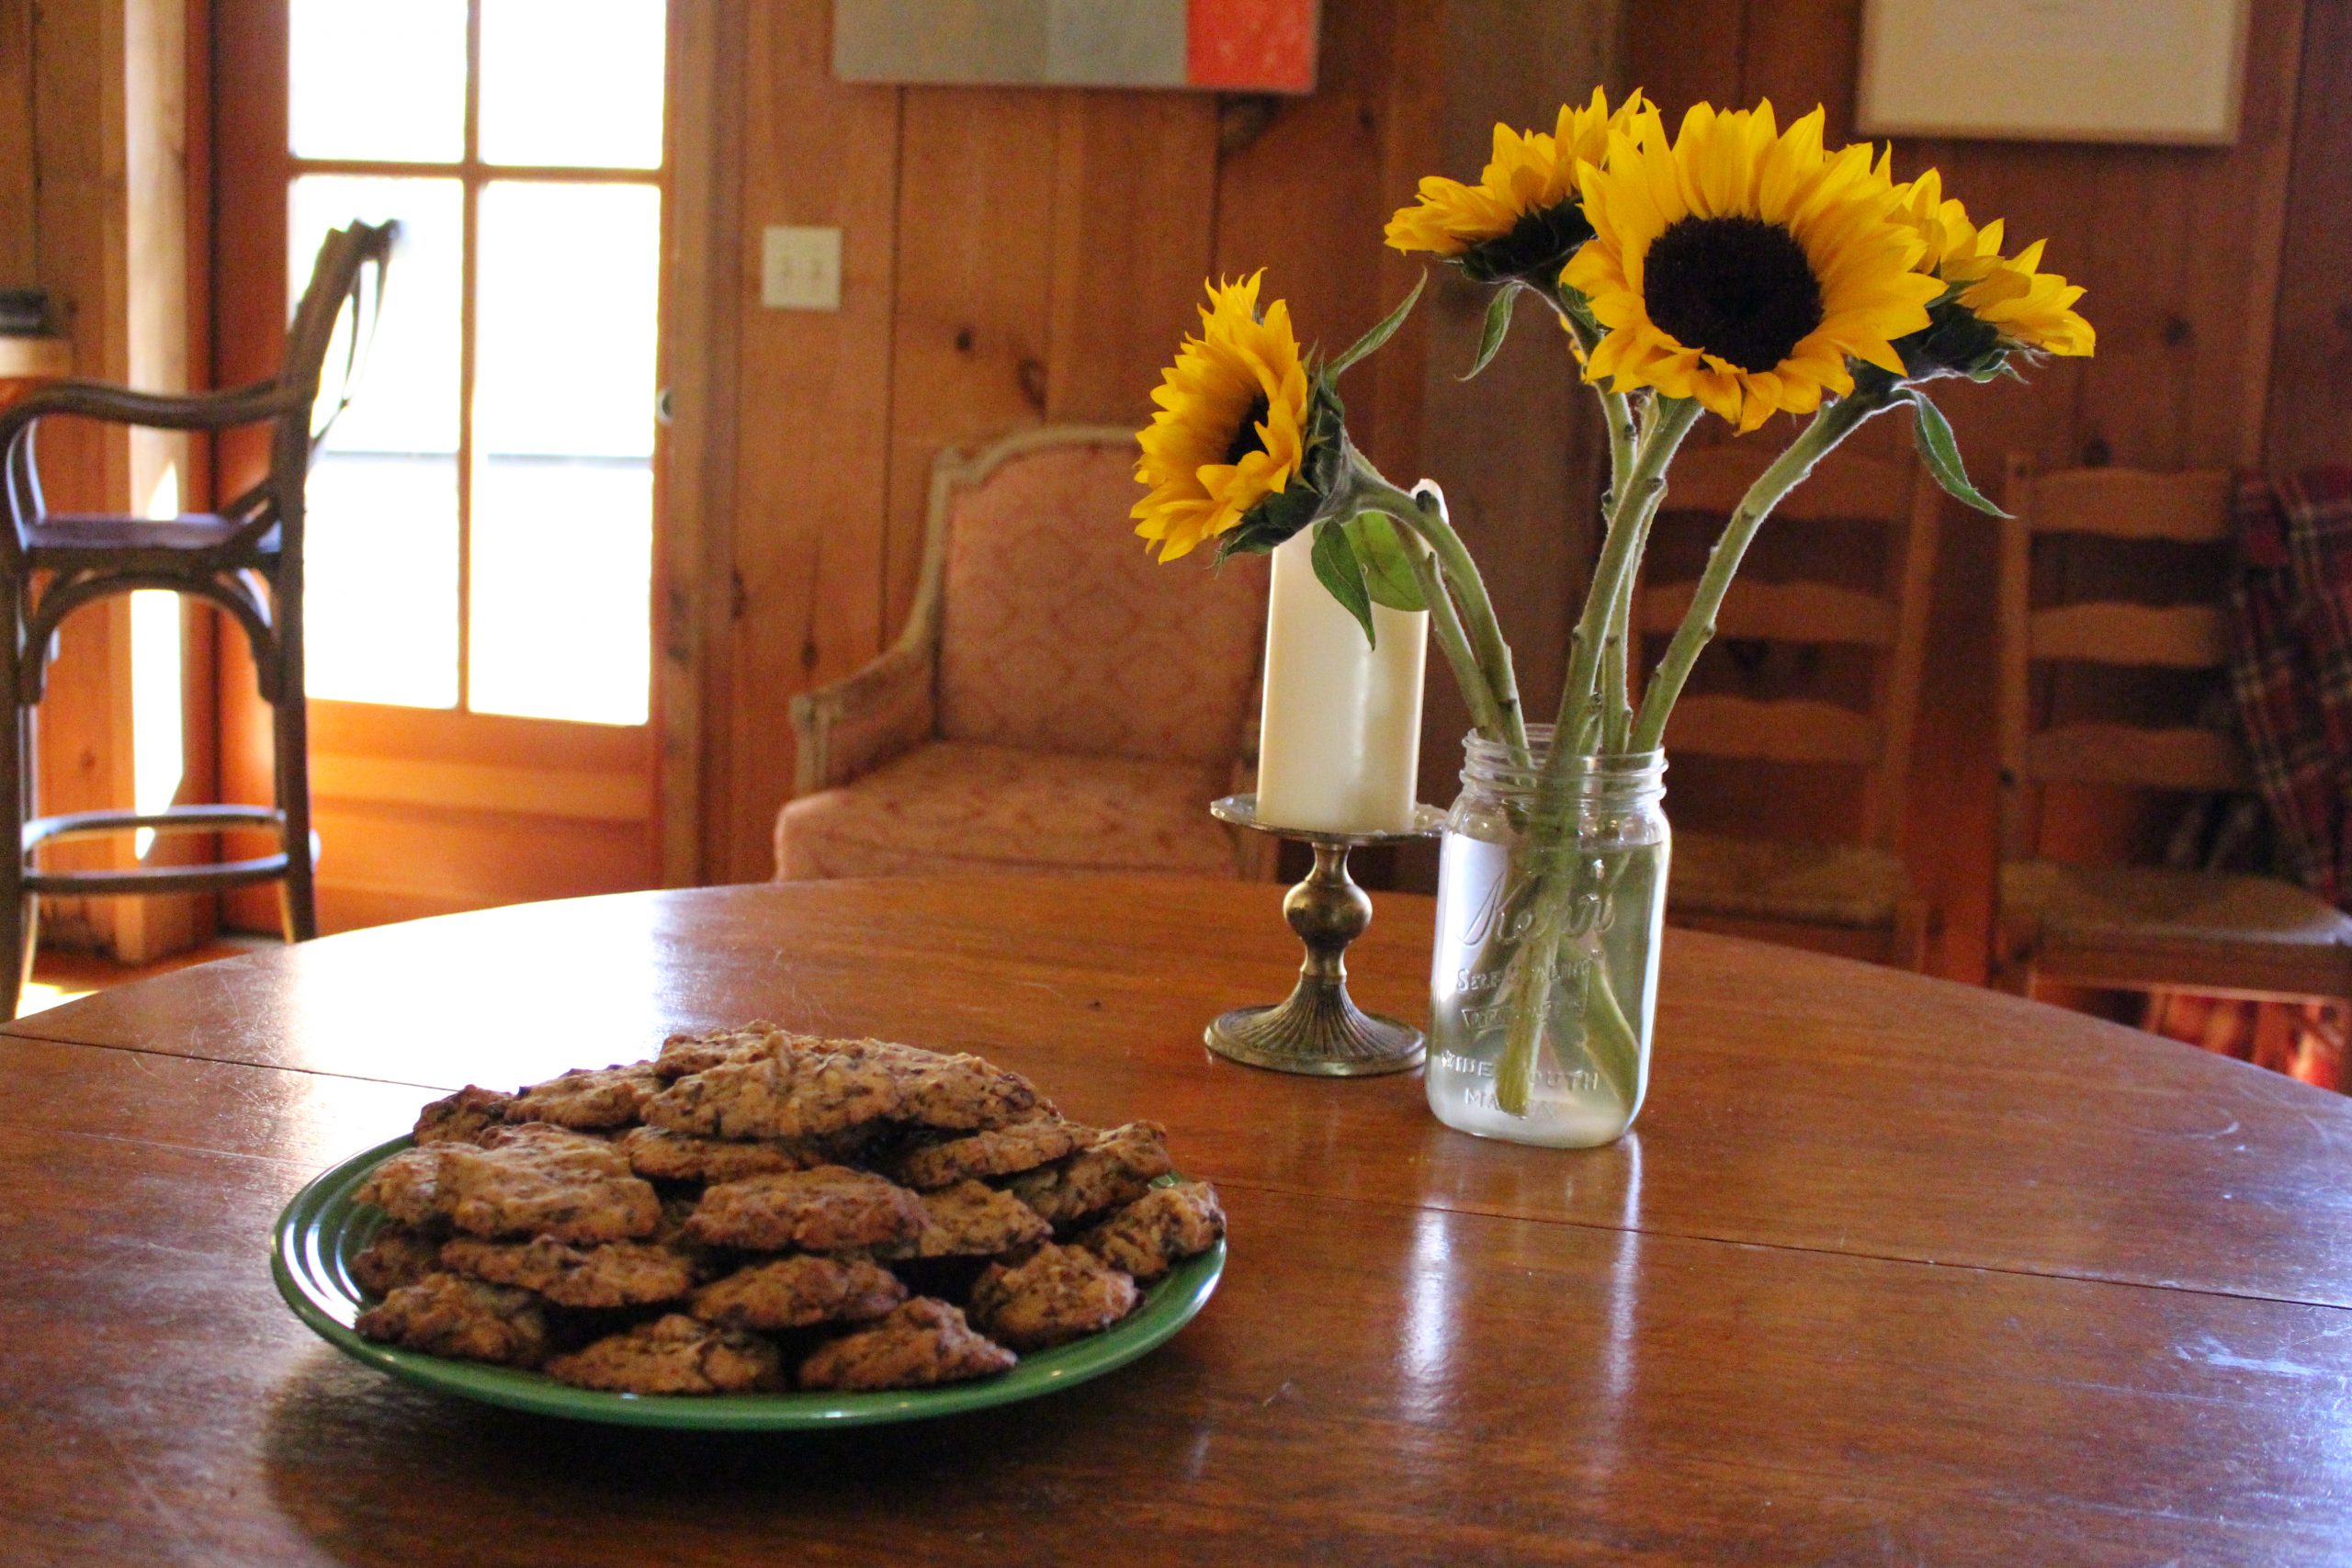 sunflowers and a plate of cookies on a table